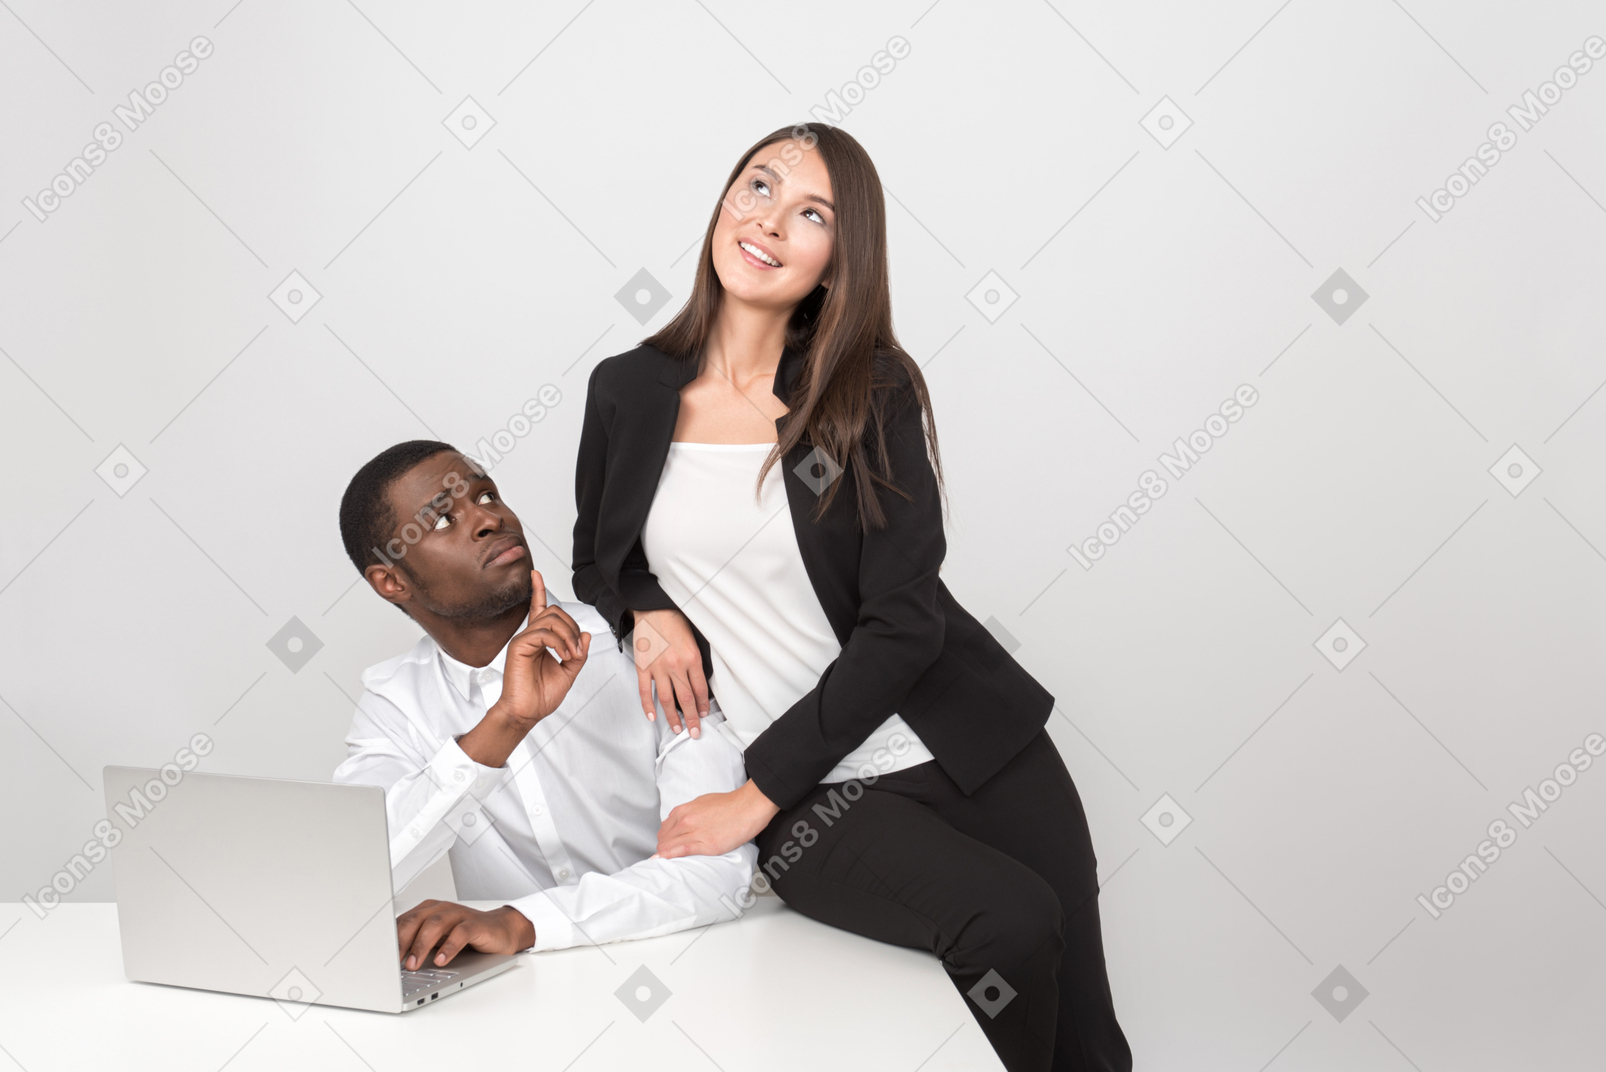 Attractive asian woman hugging her amazed collegue in the workplace